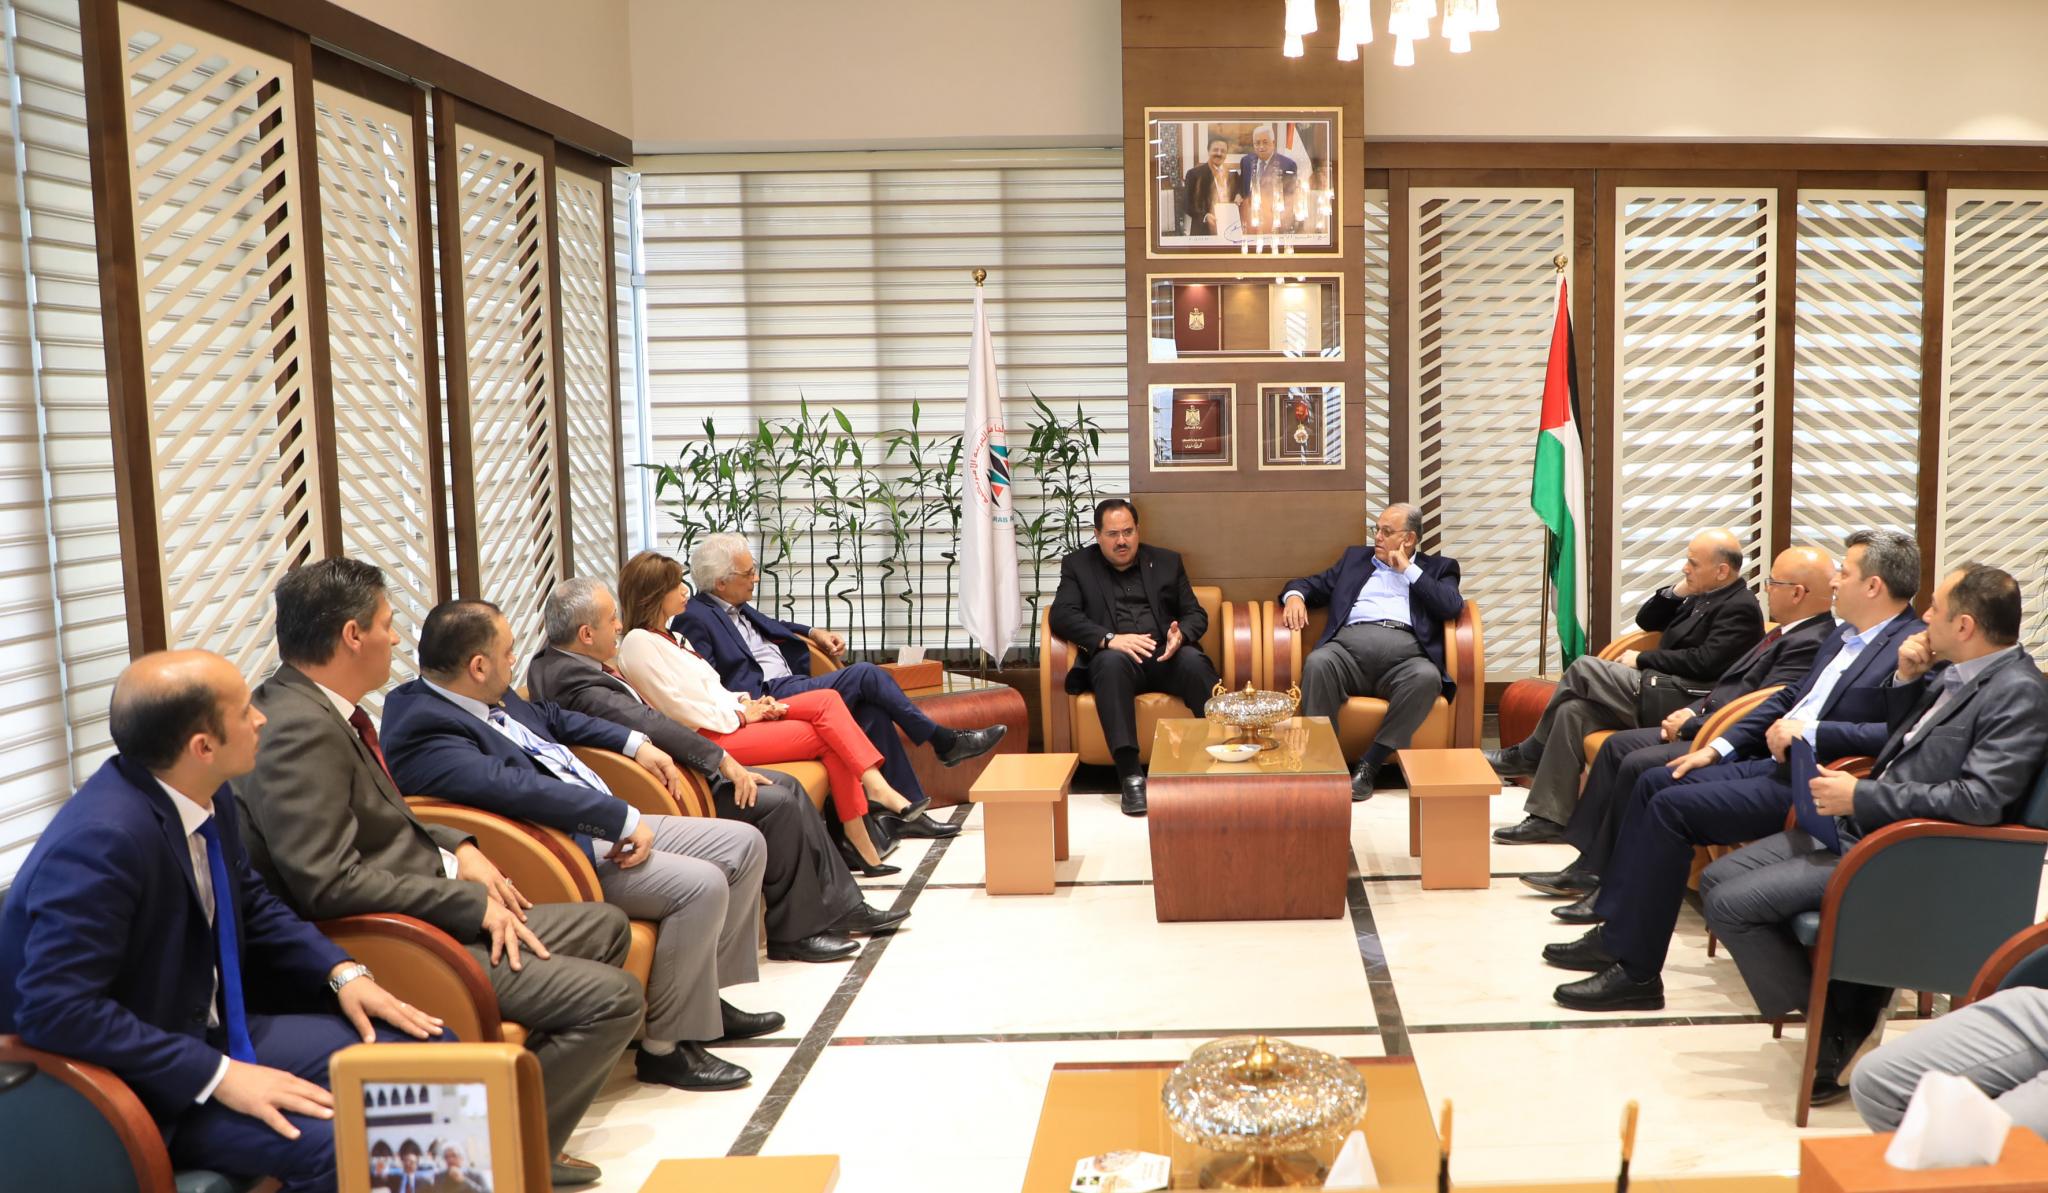 The University Honors Dr. Sabri Saidum for His Efforts in Develop the Education Sector in Palestine